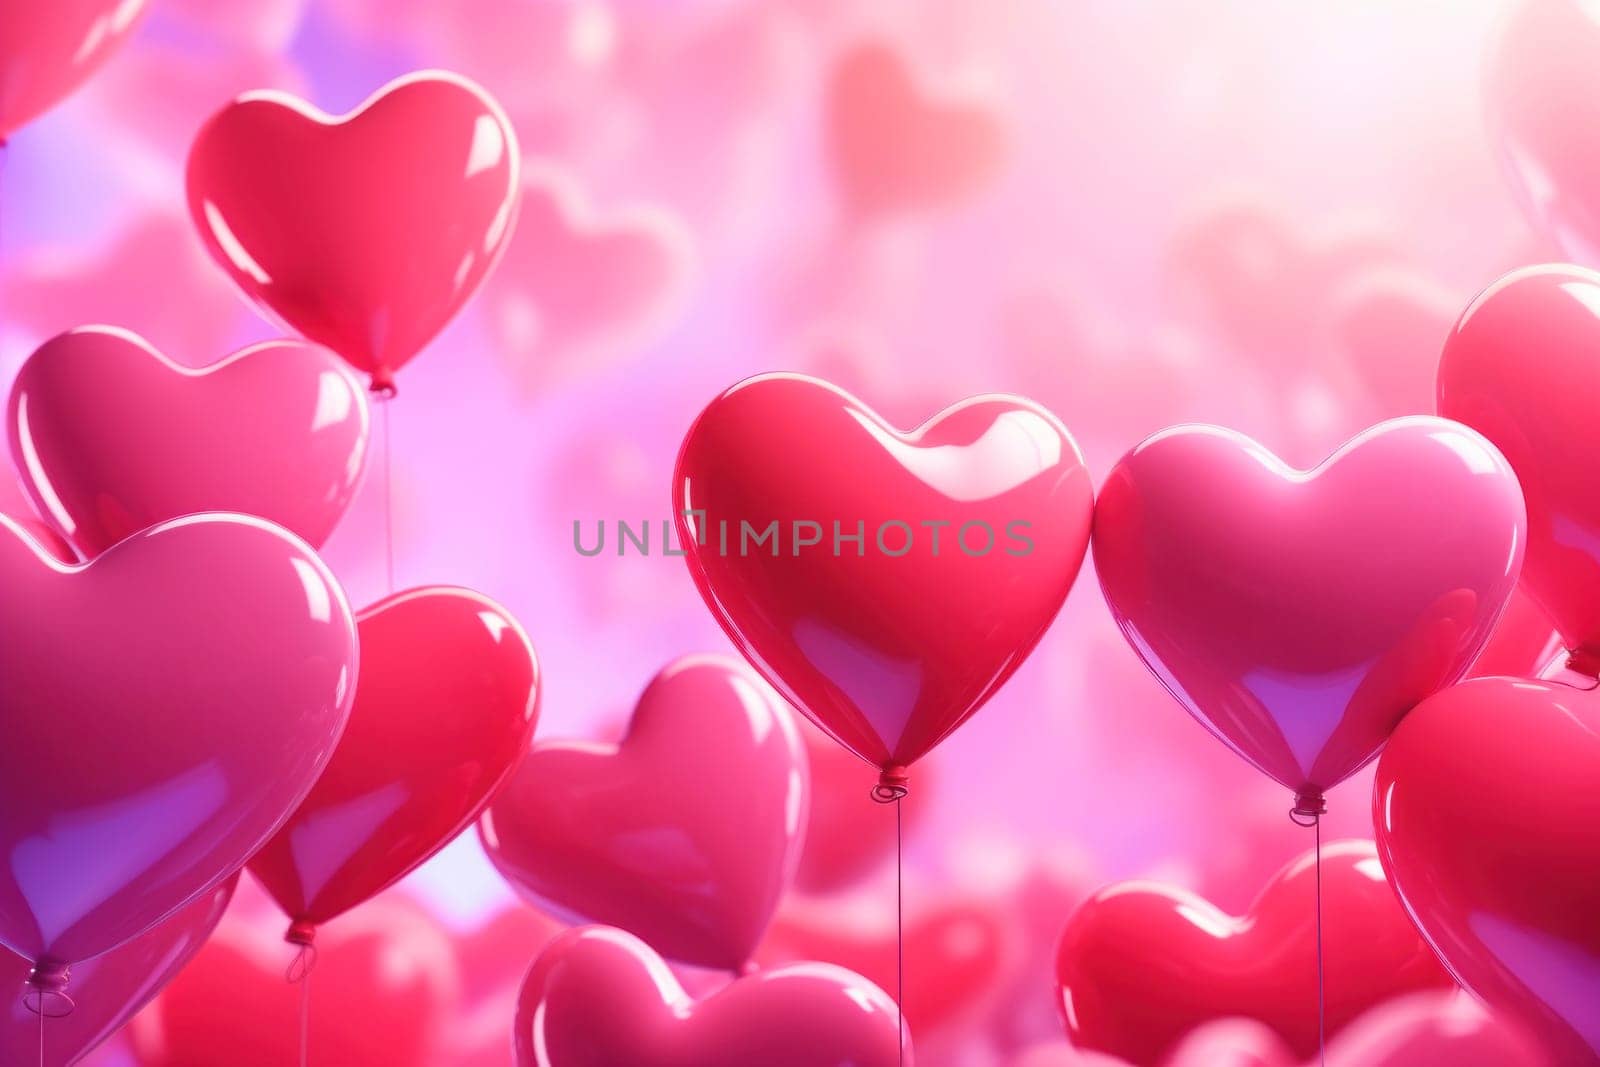 Abstract colorful festive background with heart shaped balloons by andreyz